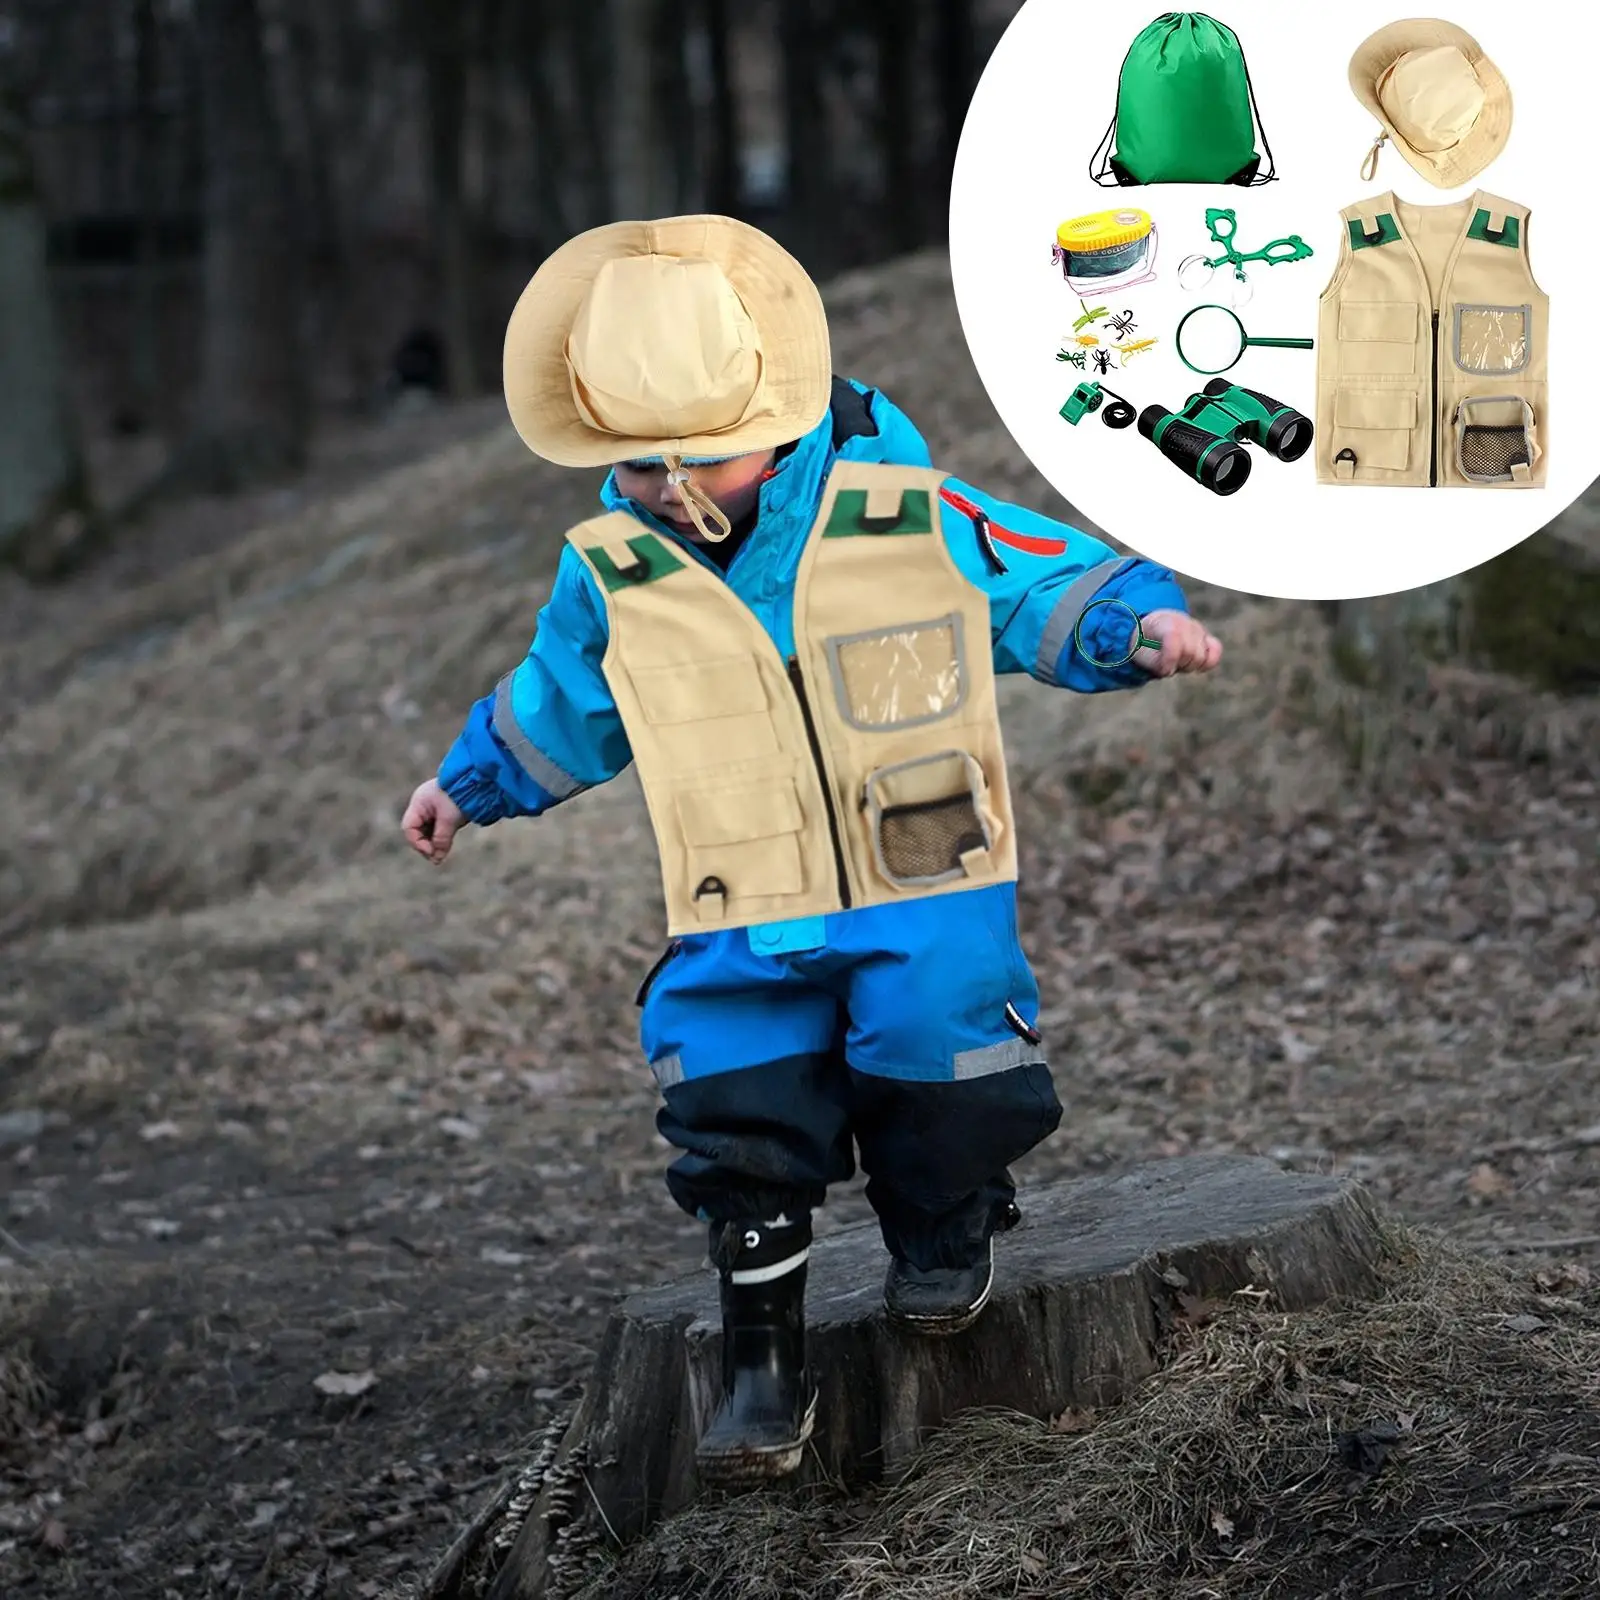 Durable Outdoor Adventure Kit Cargo Vest Hat Set 530 Telescope Magnifying Glass Camping Toys for Camping Hiking Backyard Kids